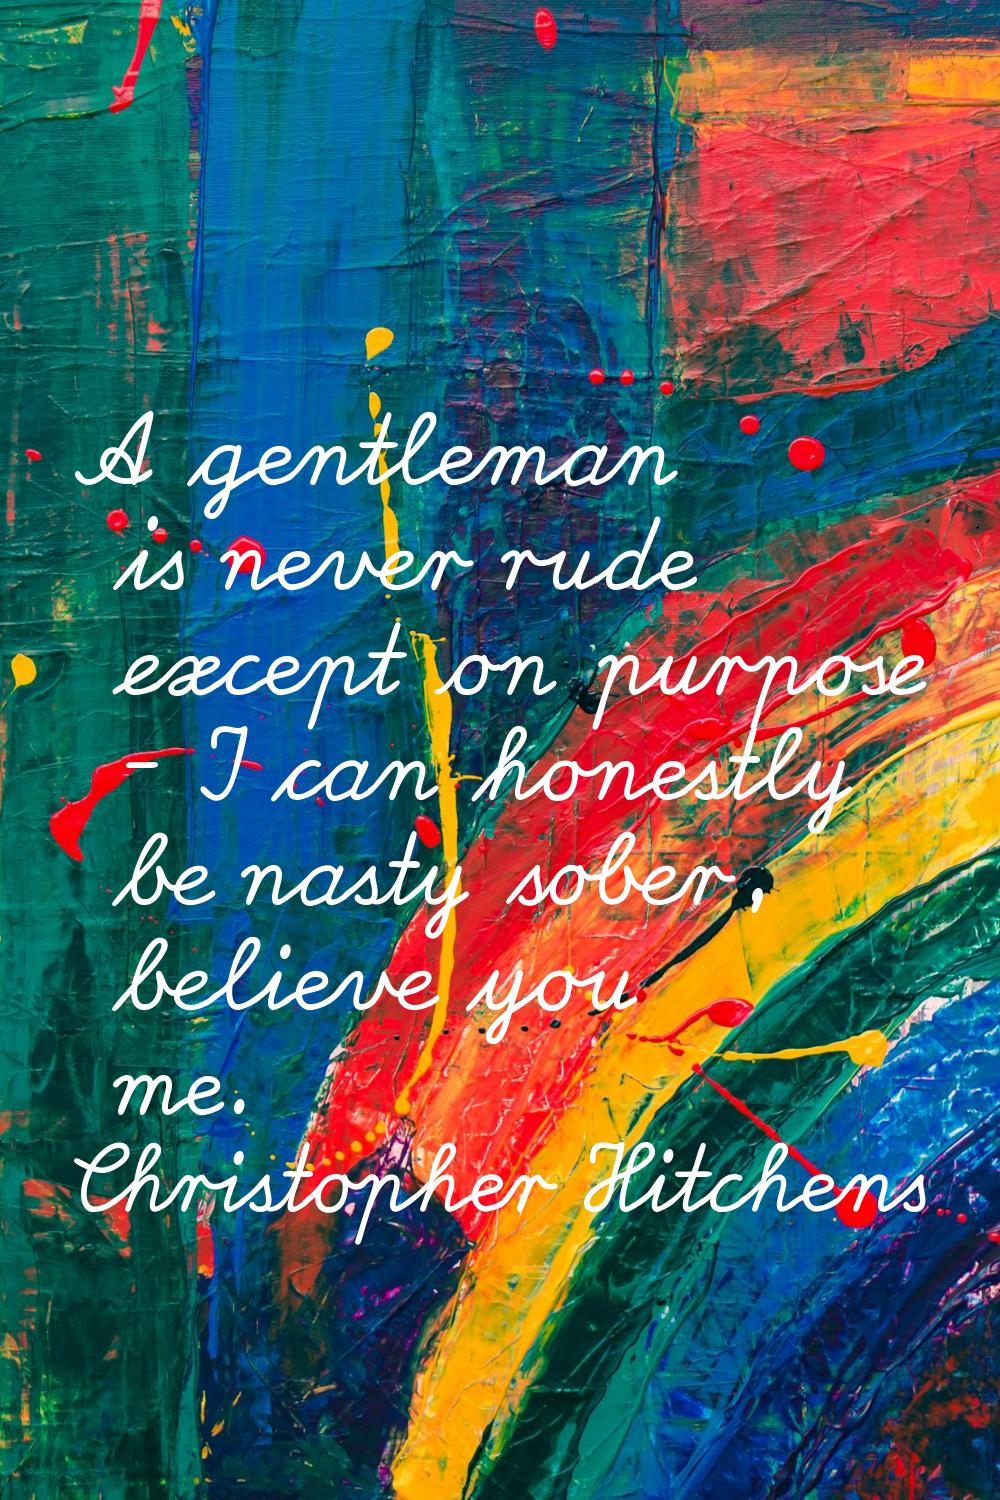 A gentleman is never rude except on purpose - I can honestly be nasty sober, believe you me.